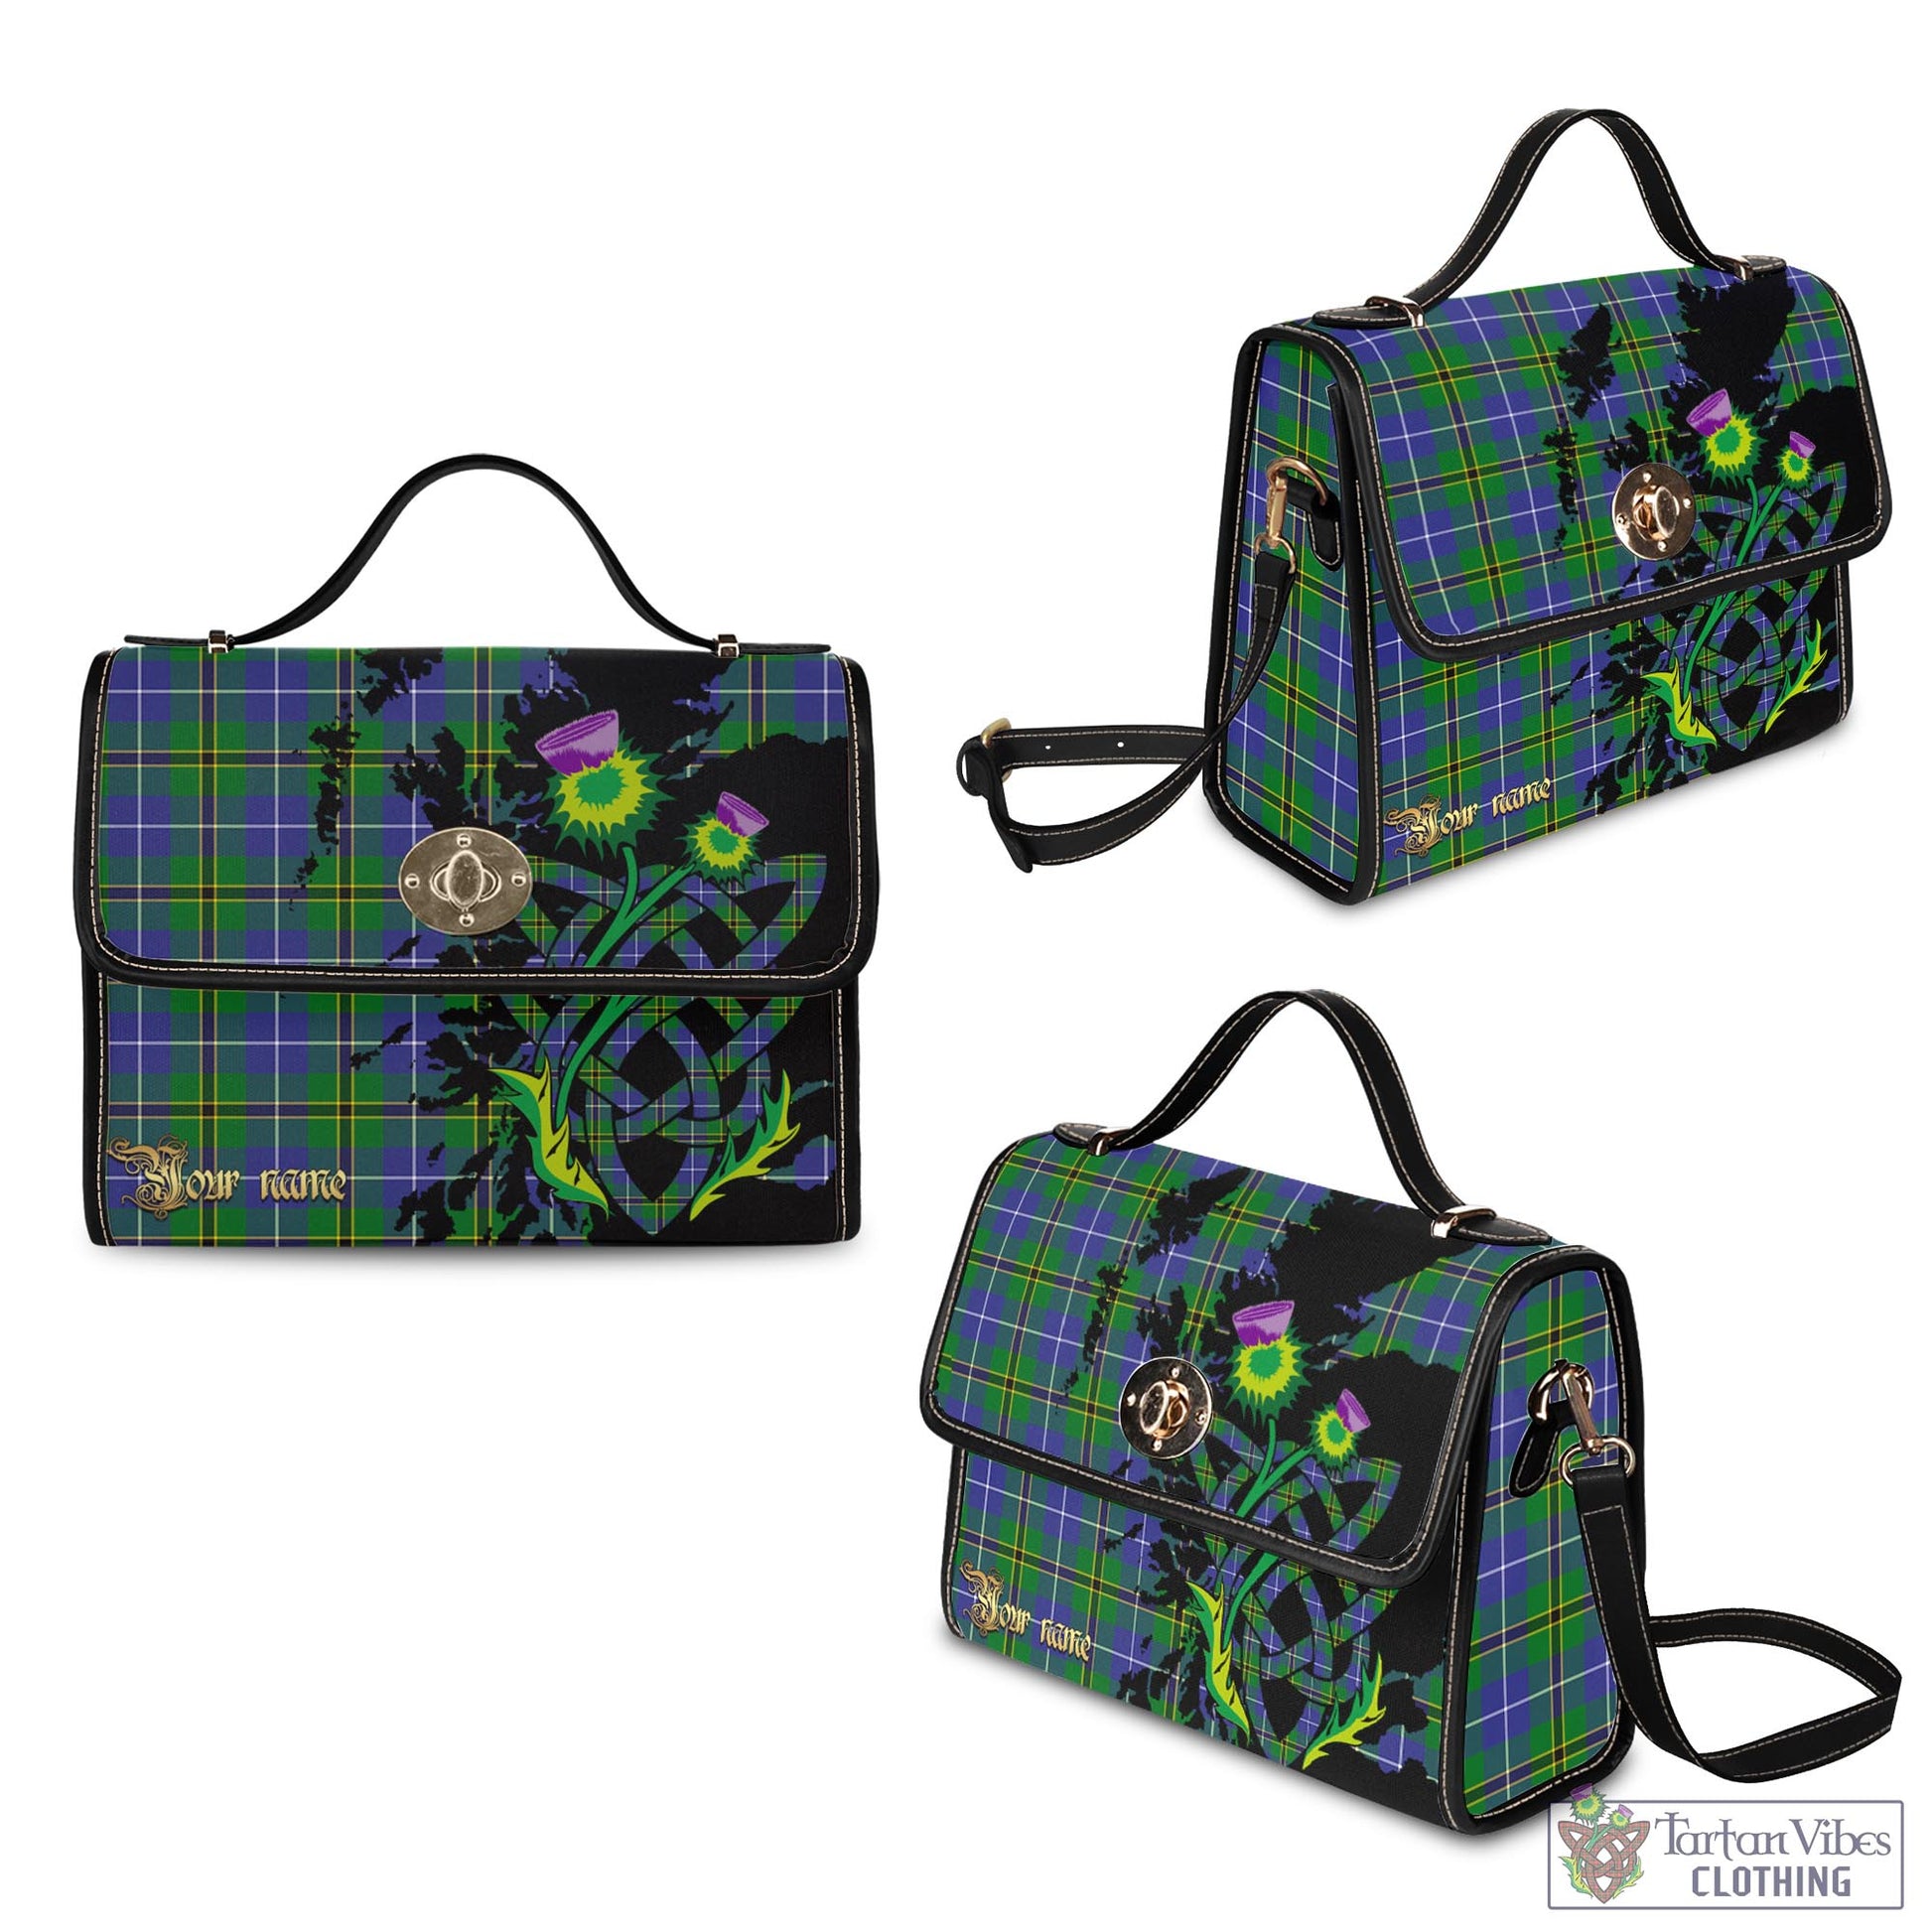 Tartan Vibes Clothing Turnbull Hunting Tartan Waterproof Canvas Bag with Scotland Map and Thistle Celtic Accents